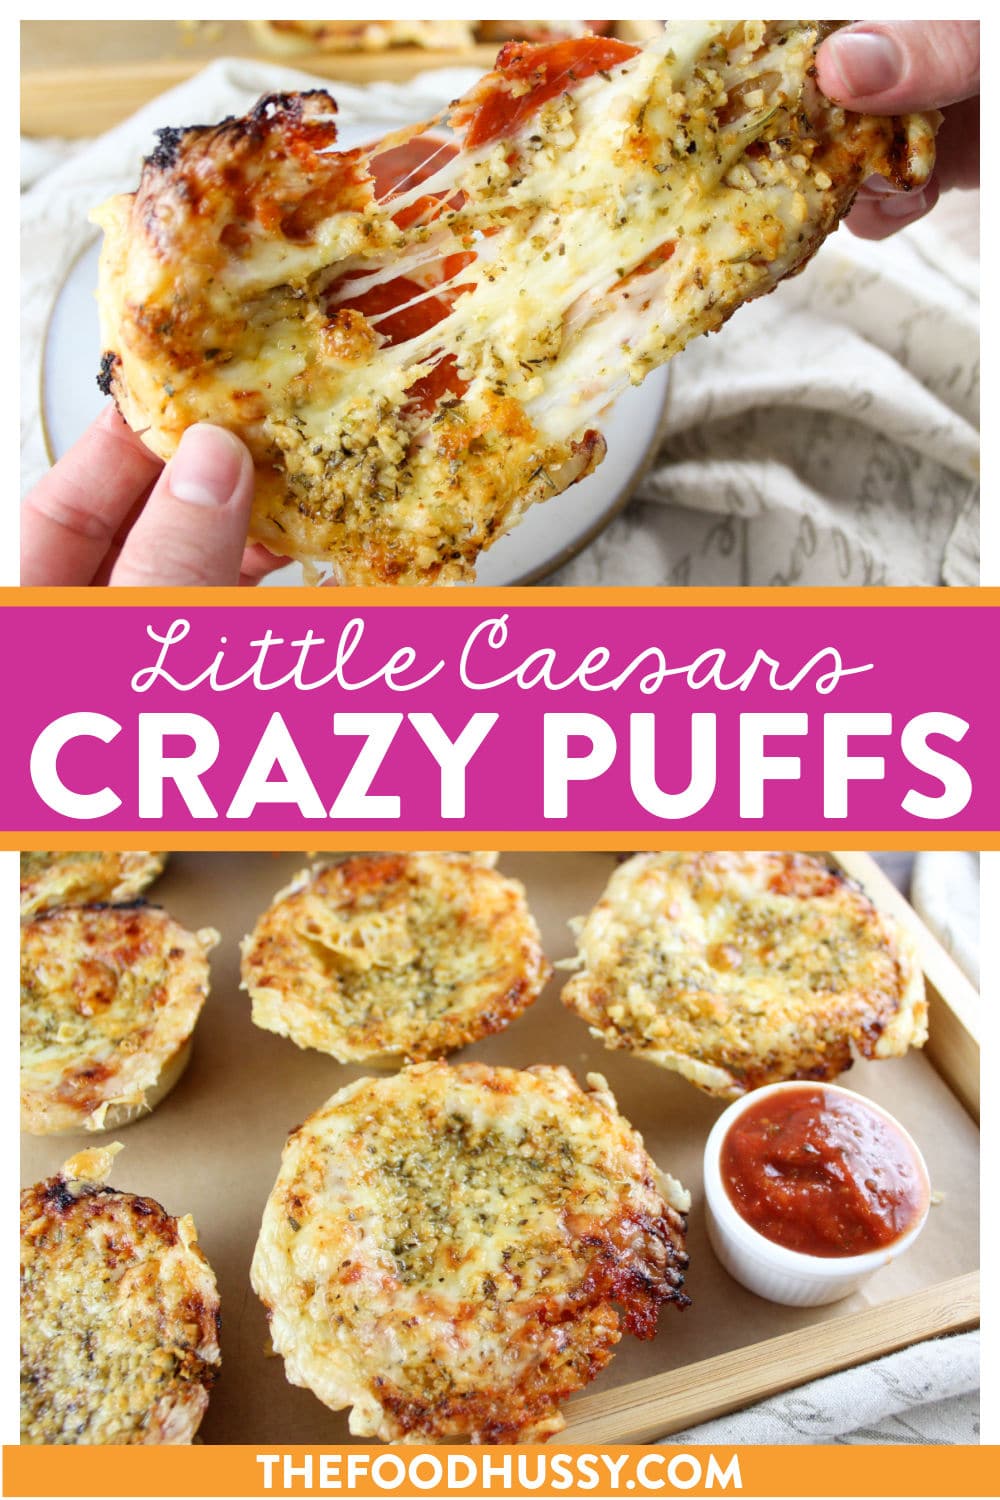 Little Caesars Crazy Puffs are the newest menu item taking social media by storm! Bites of handheld goodness filled with cheesy pepperoni pizza toppings! But guess what - you can make them at hot-n-ready AT HOME for less $$!  via @foodhussy